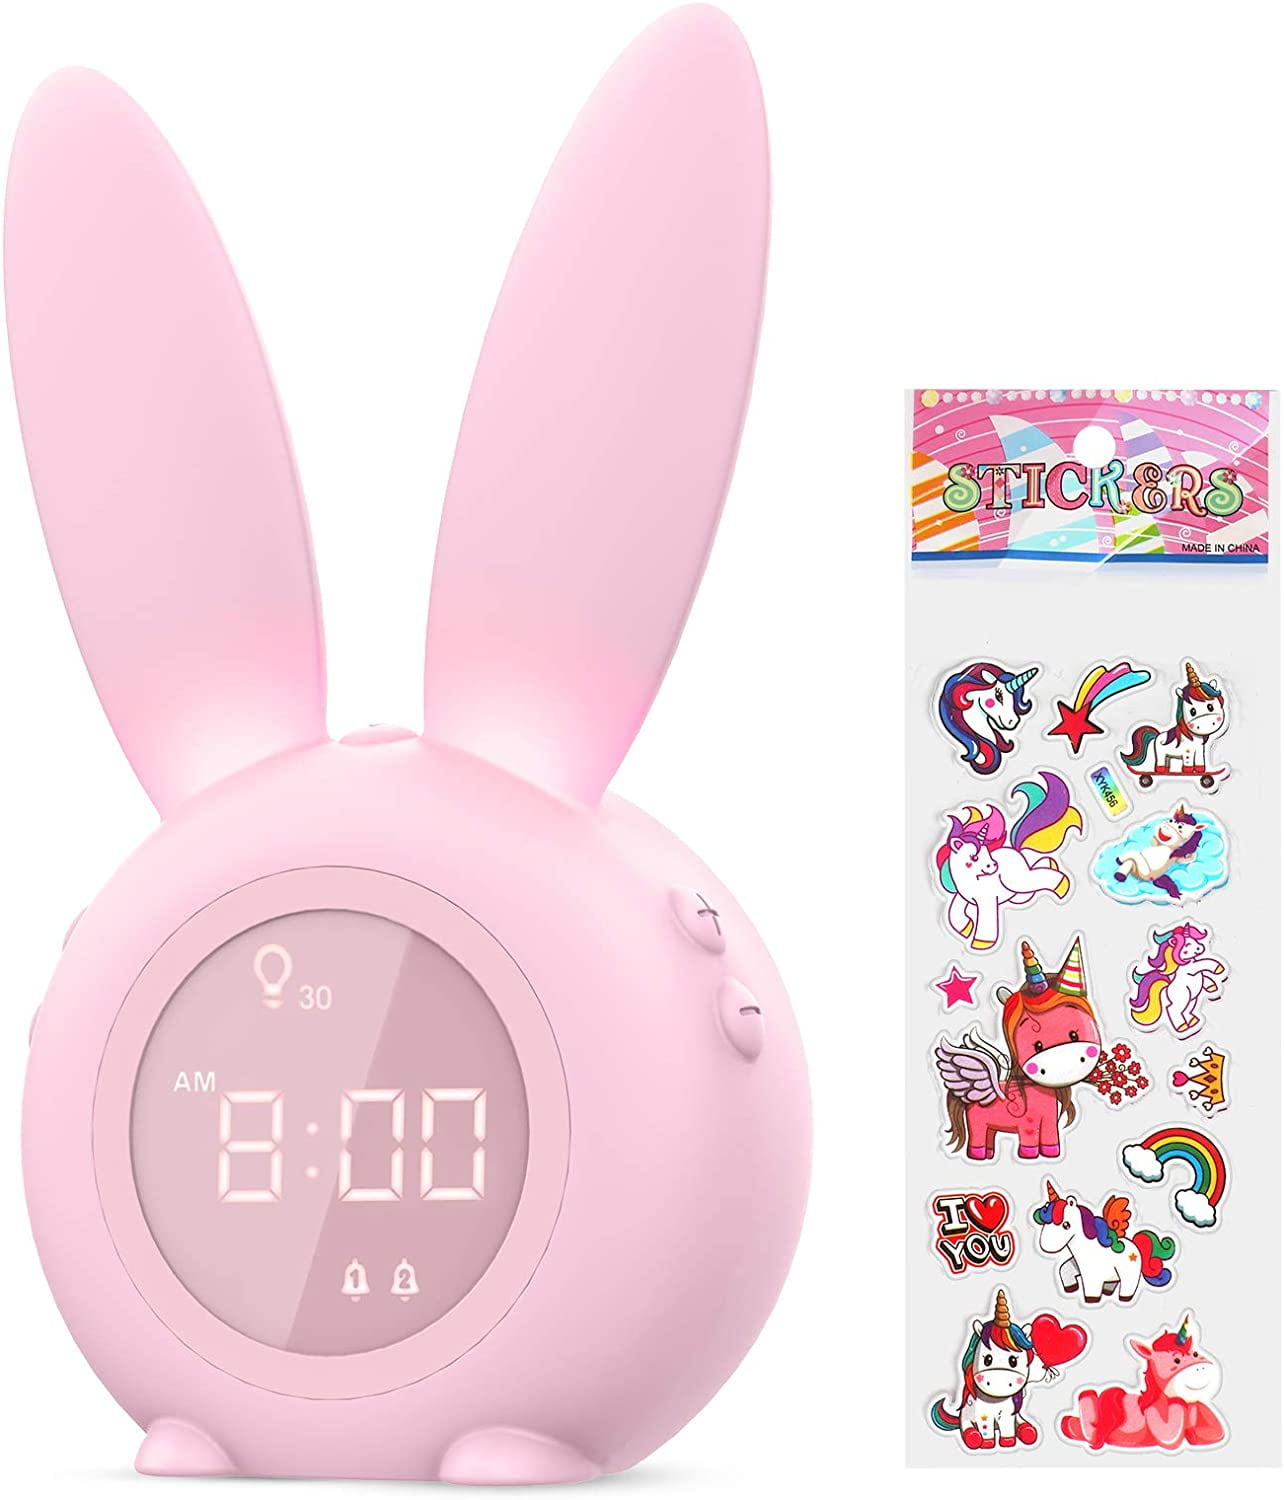 Cute Bunny Alarm Clock Wall Clock Night Light Table Clock Wake Up Light Cartoon Rabbit Bedside Table Lamp Gift for Kids Children Adults Mother Pink 